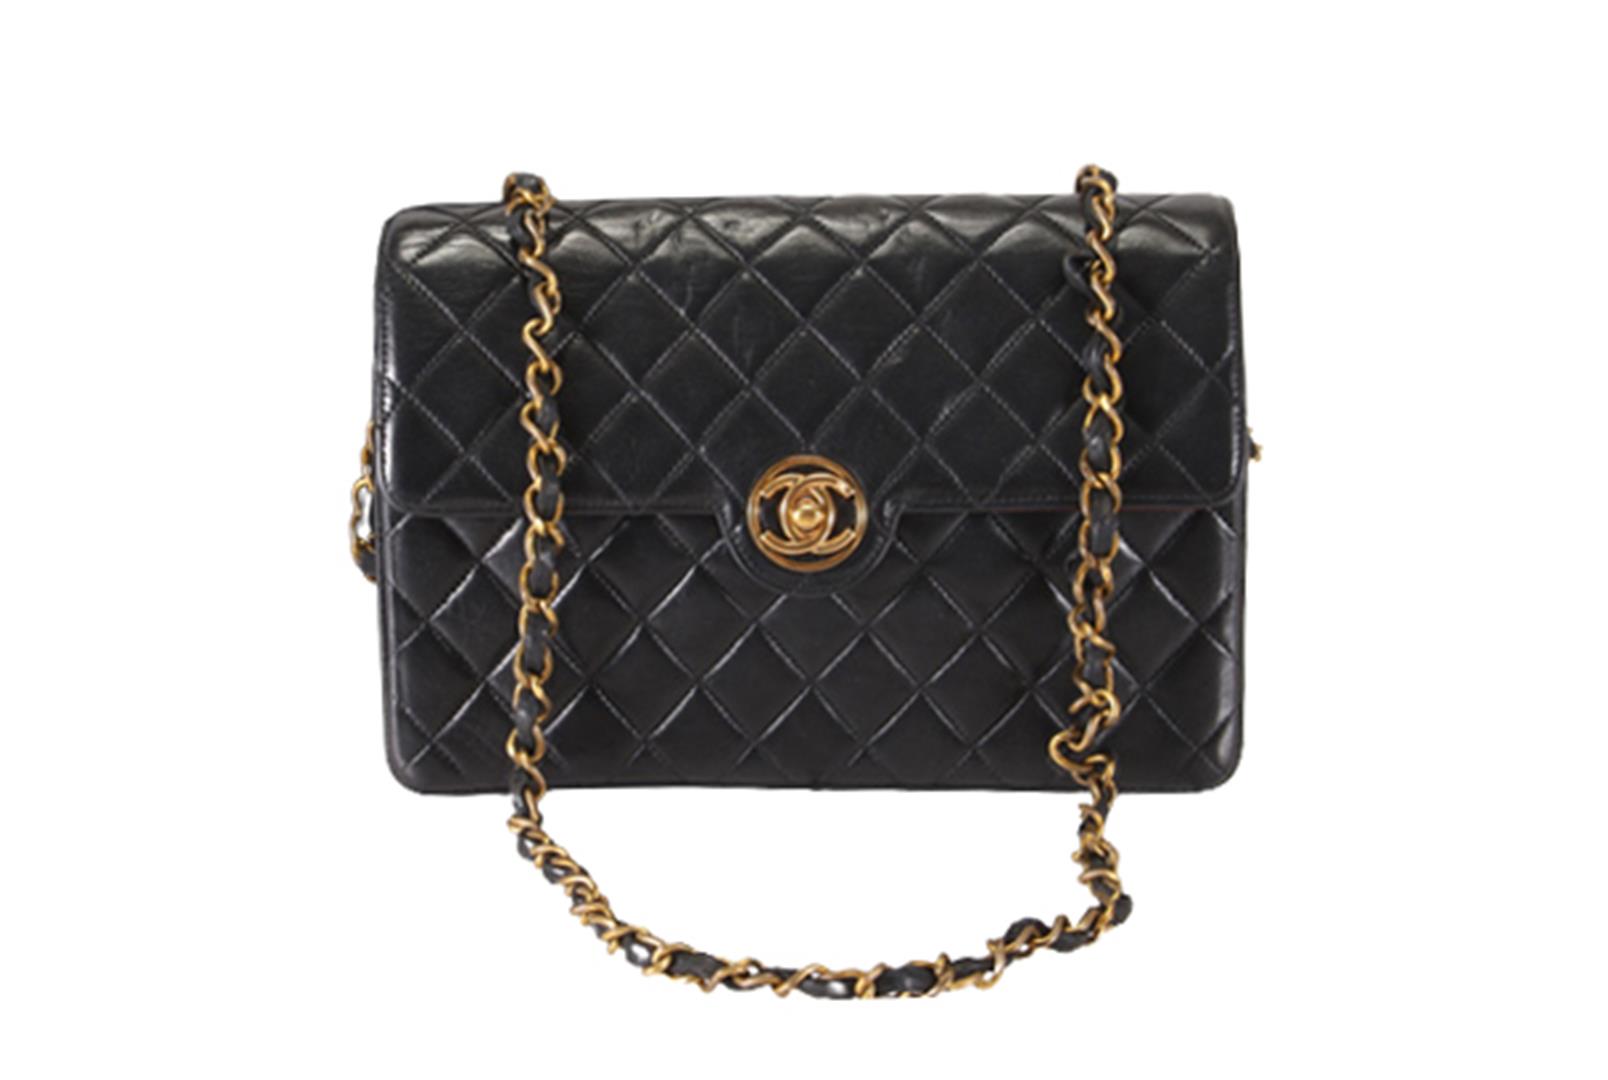 Chanel Black Quilted Lambskin Leather CC